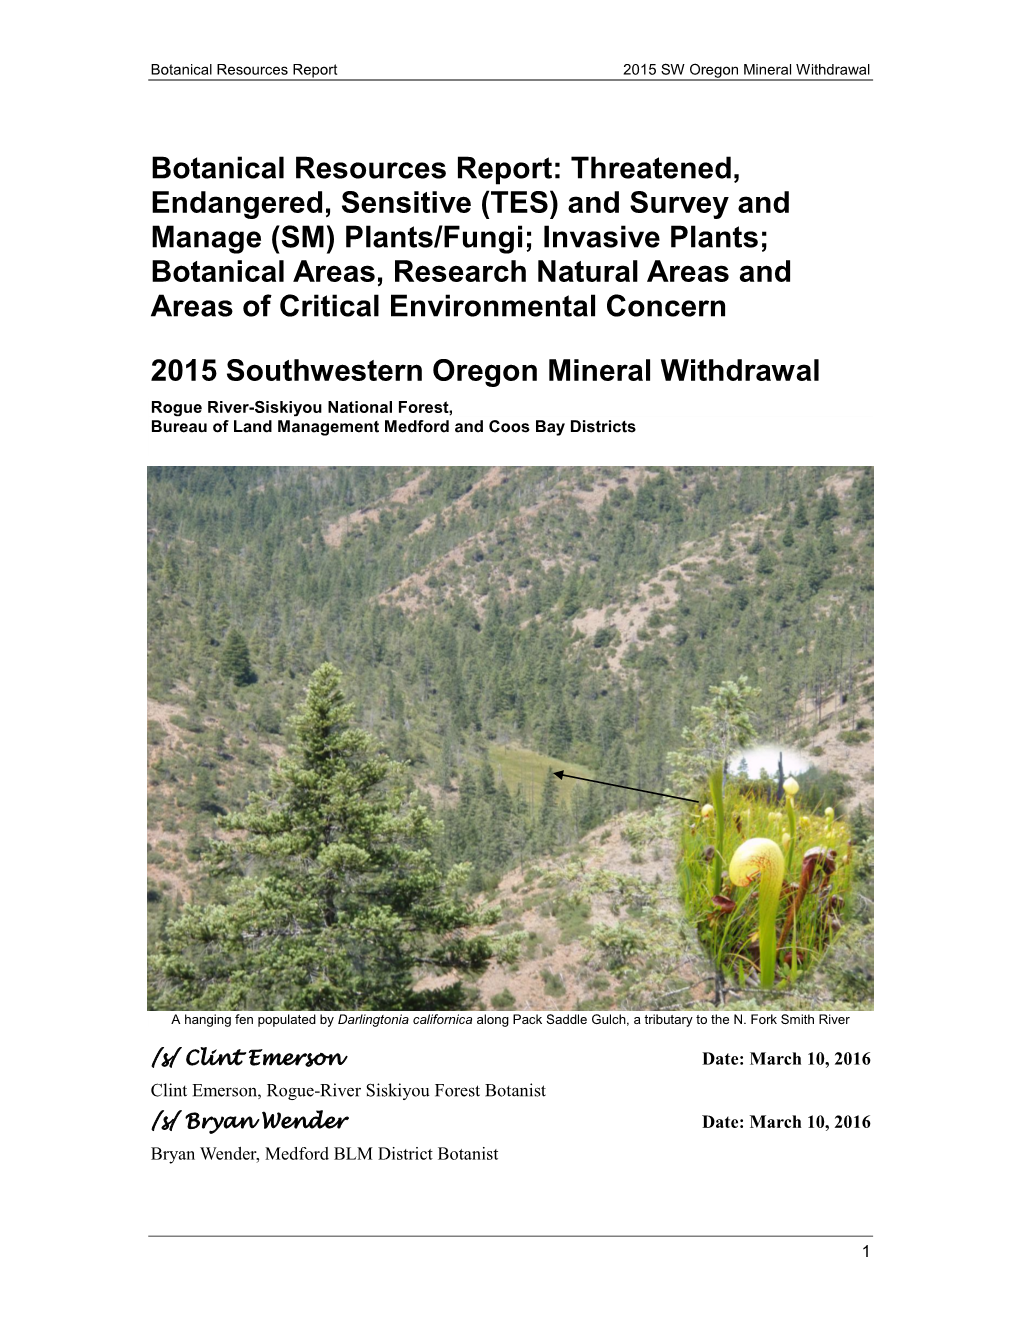 (TES) and Survey and Manage (SM) Plants/Fungi; Invasive Plants; Botanical Areas, Research Natural Areas and Areas of Critical Environmental Concern